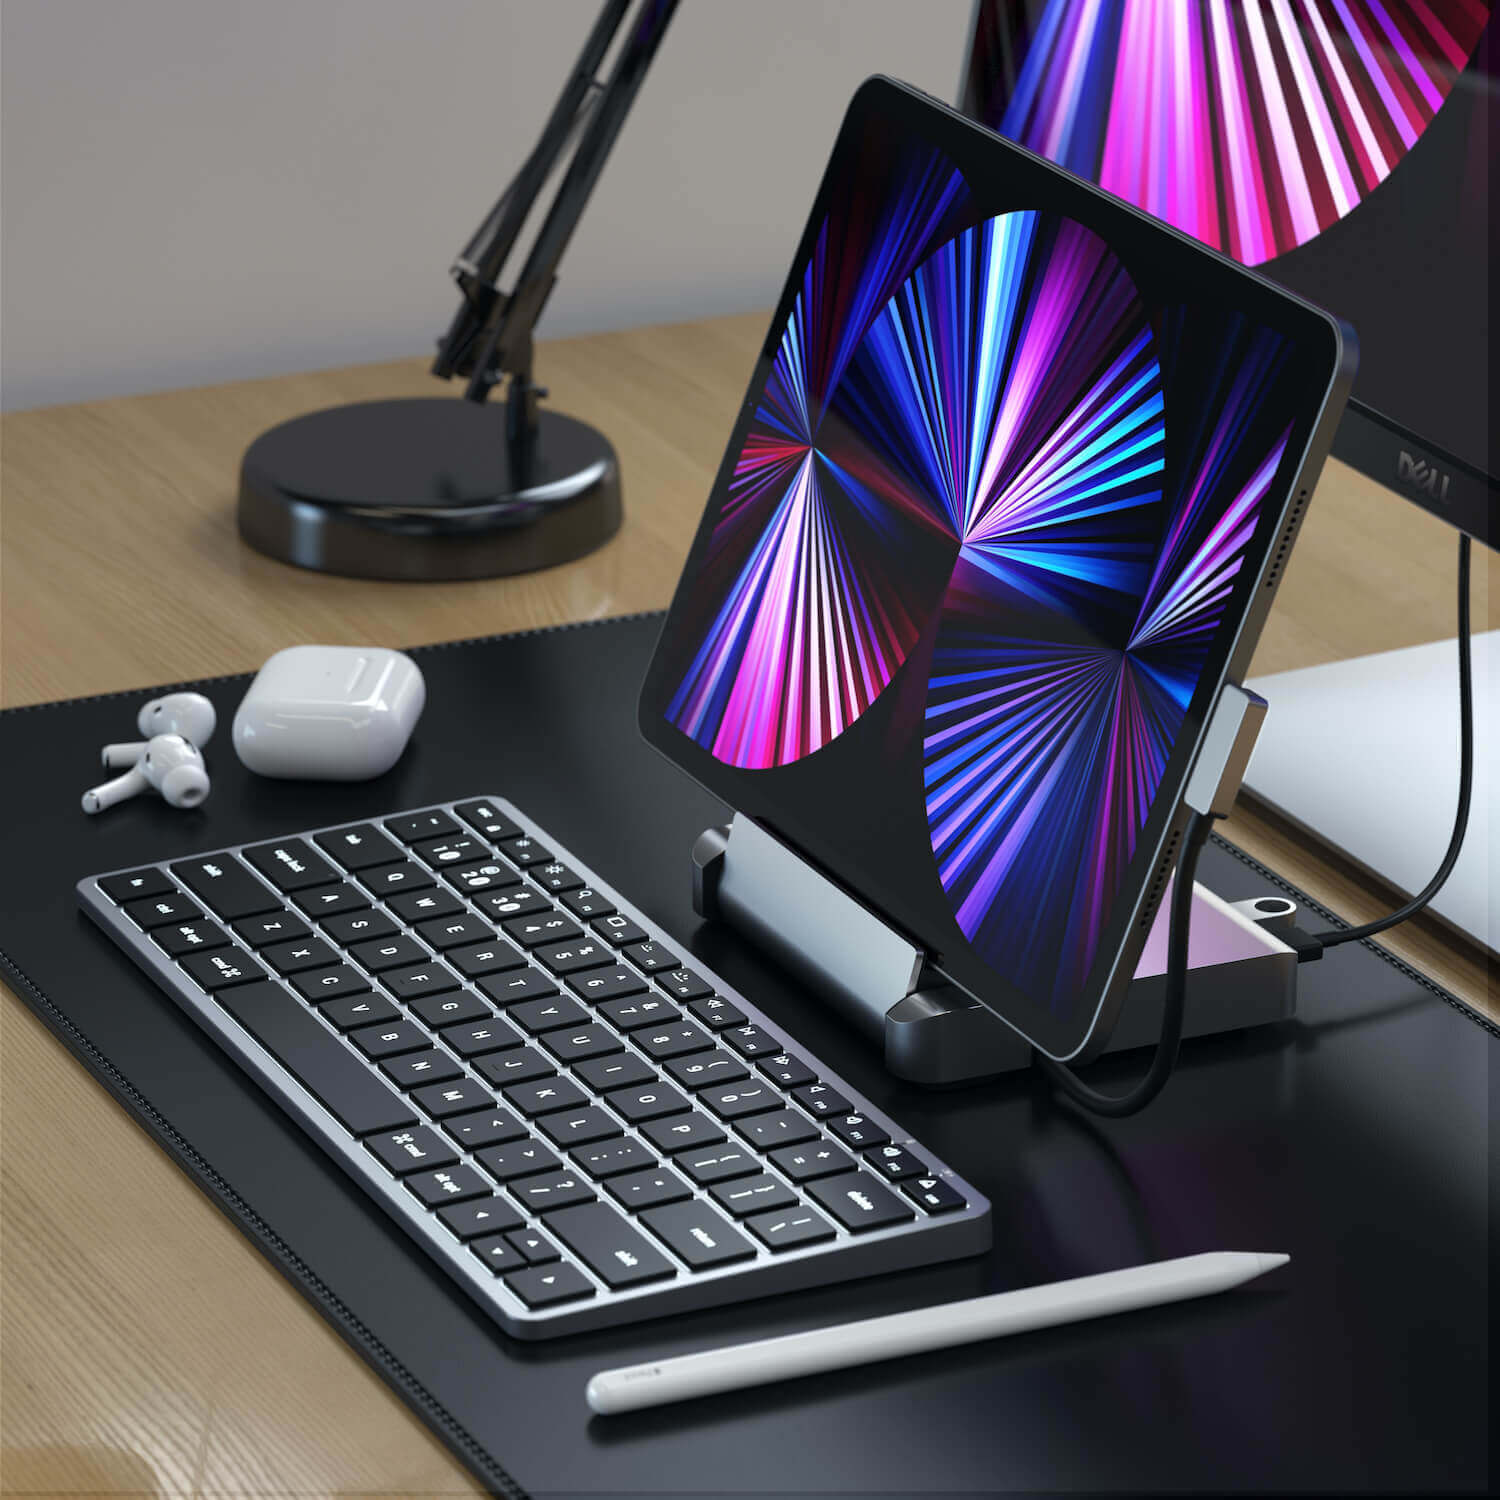 Satechi stand and hub for iPad Pro